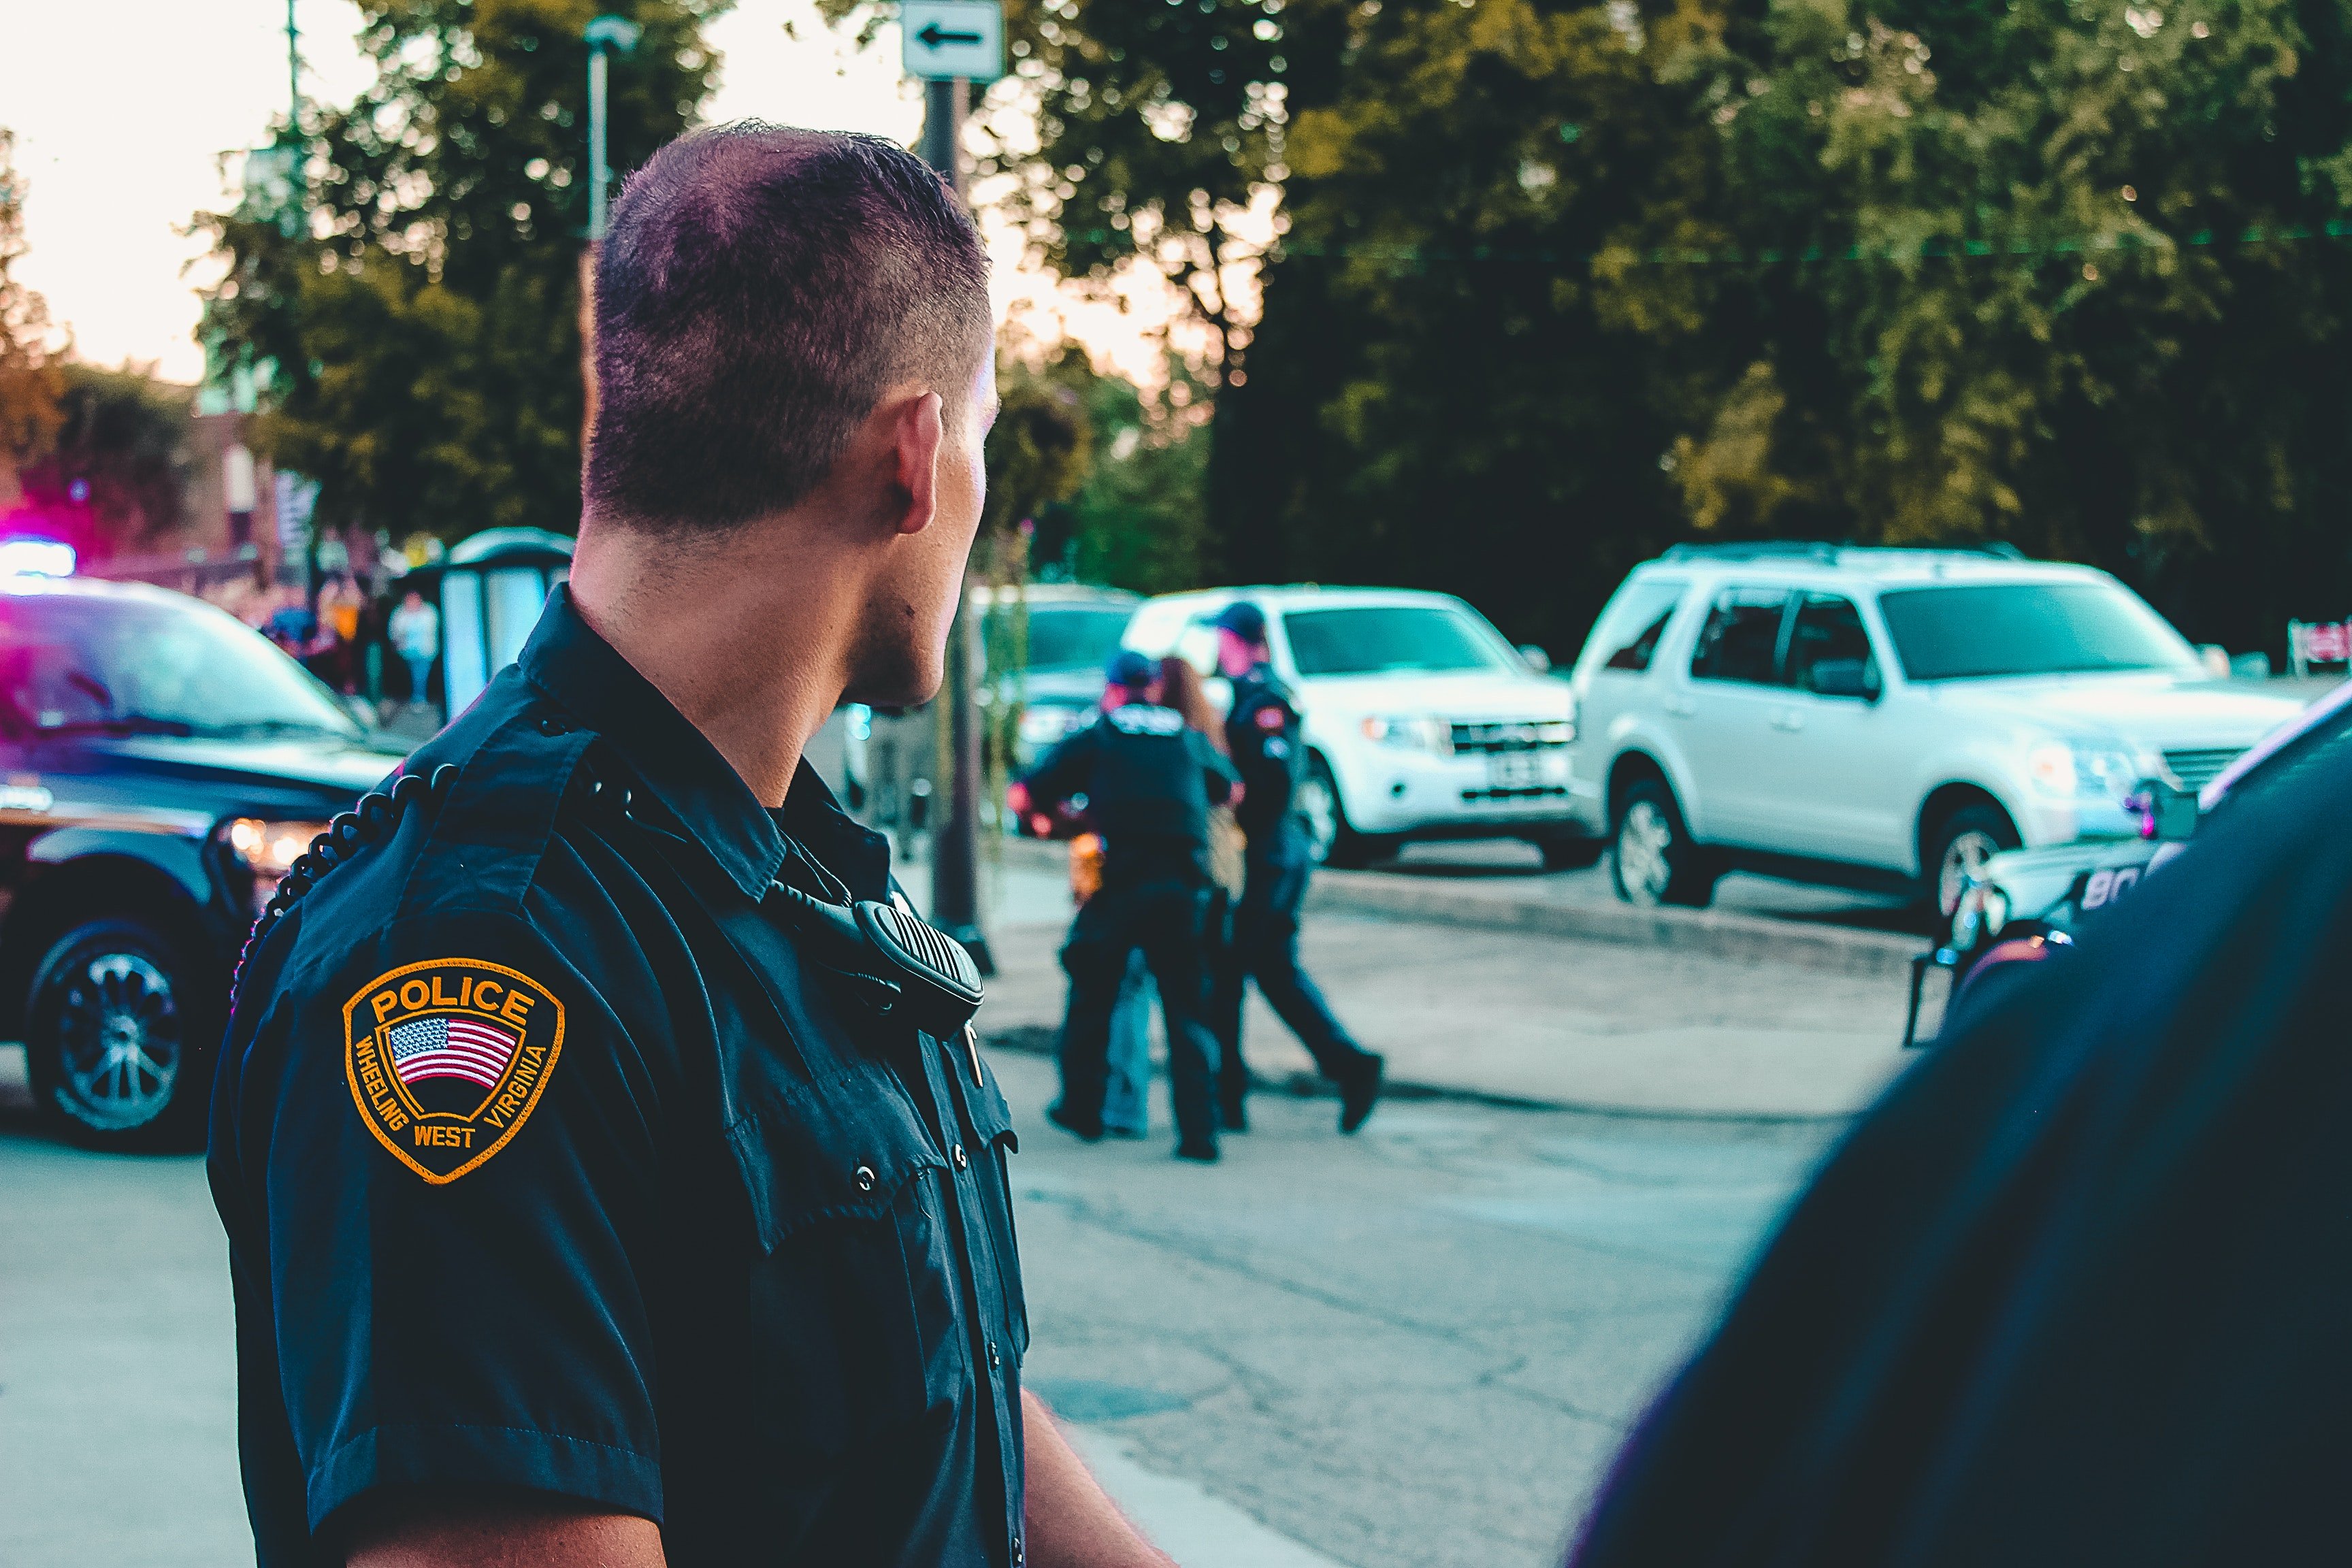 David was arrested for what he'd done | Photo: Pexels